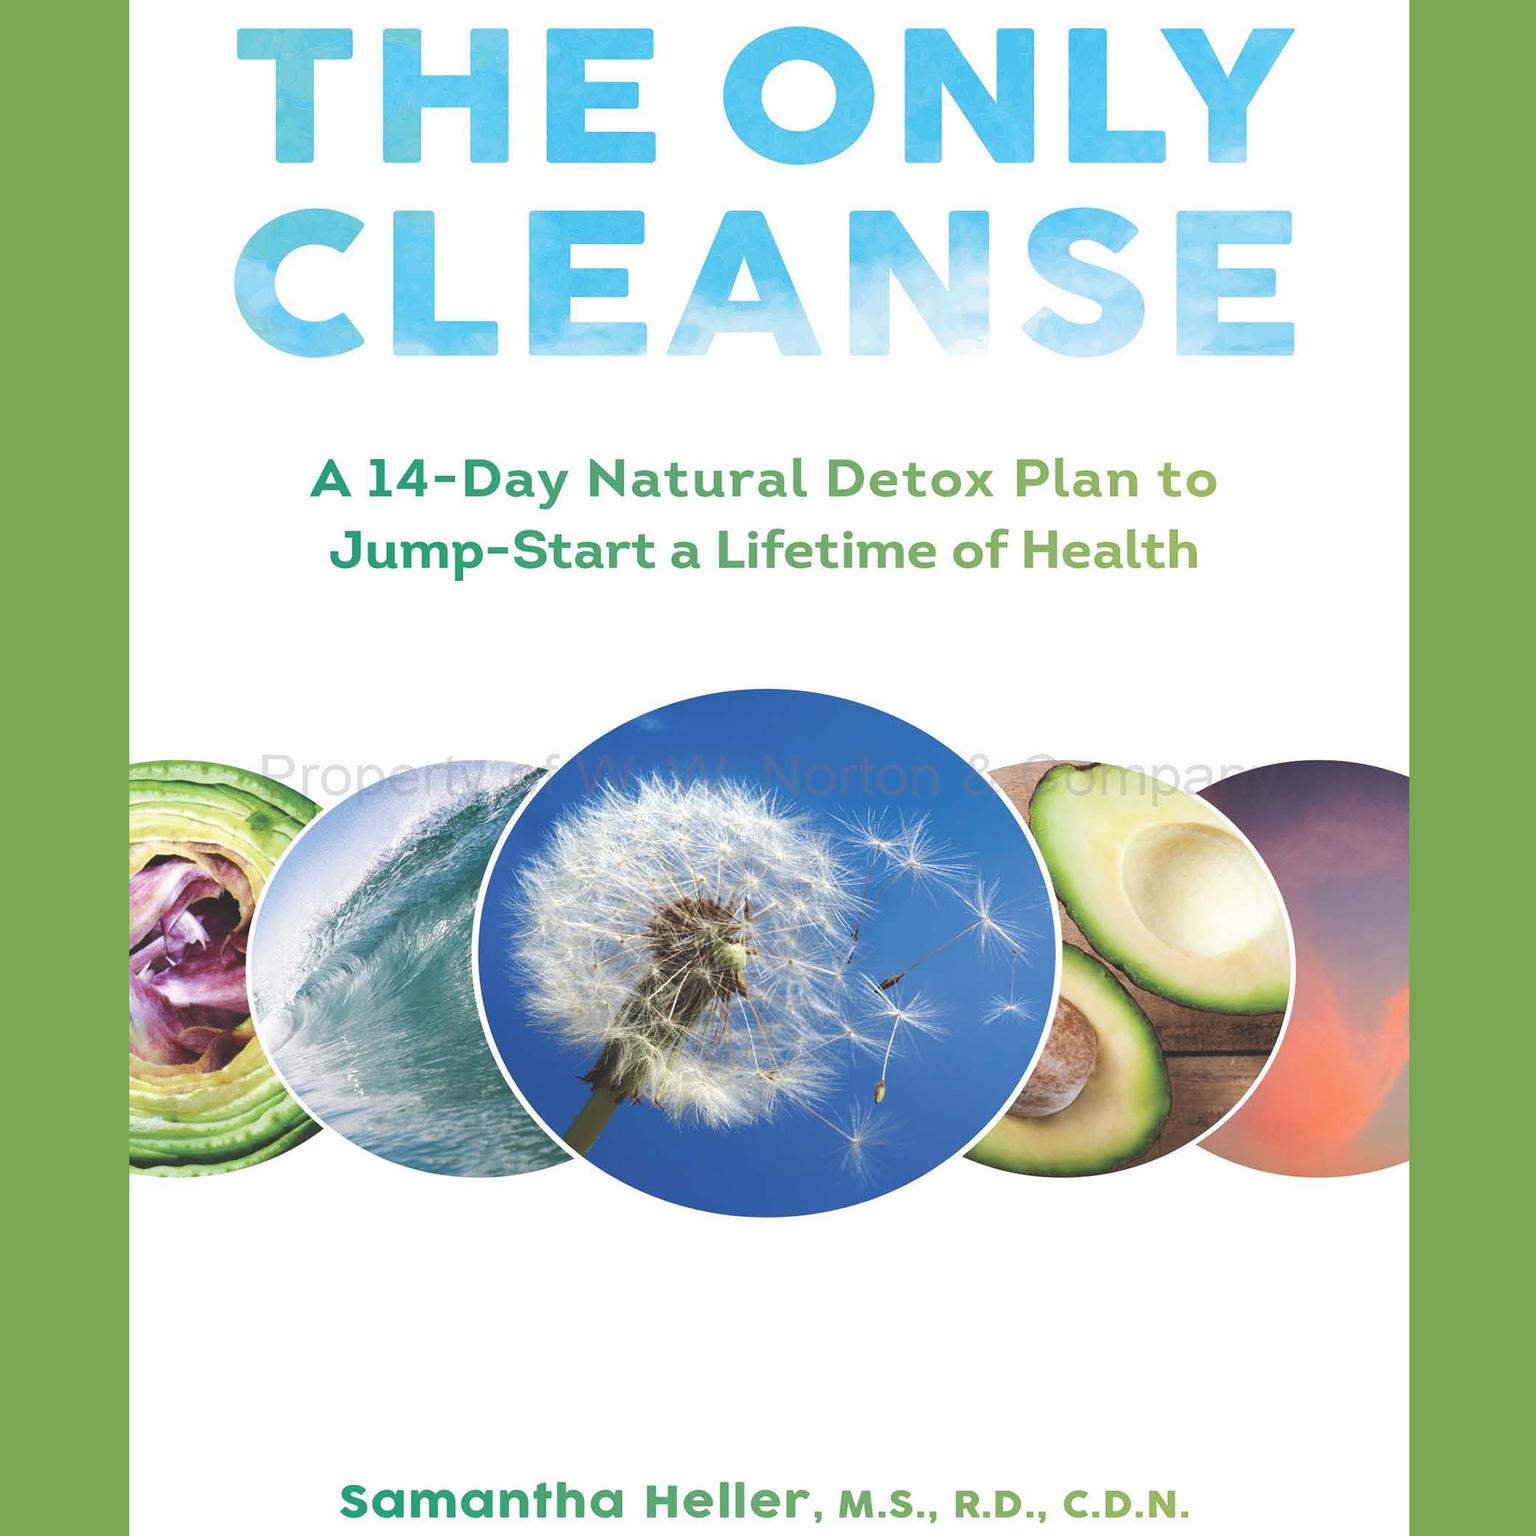 The Only Cleanse: A 14-Day Natural Detox Plan to Jump-Start a Lifetime of Health Audiobook, by Samantha Heller